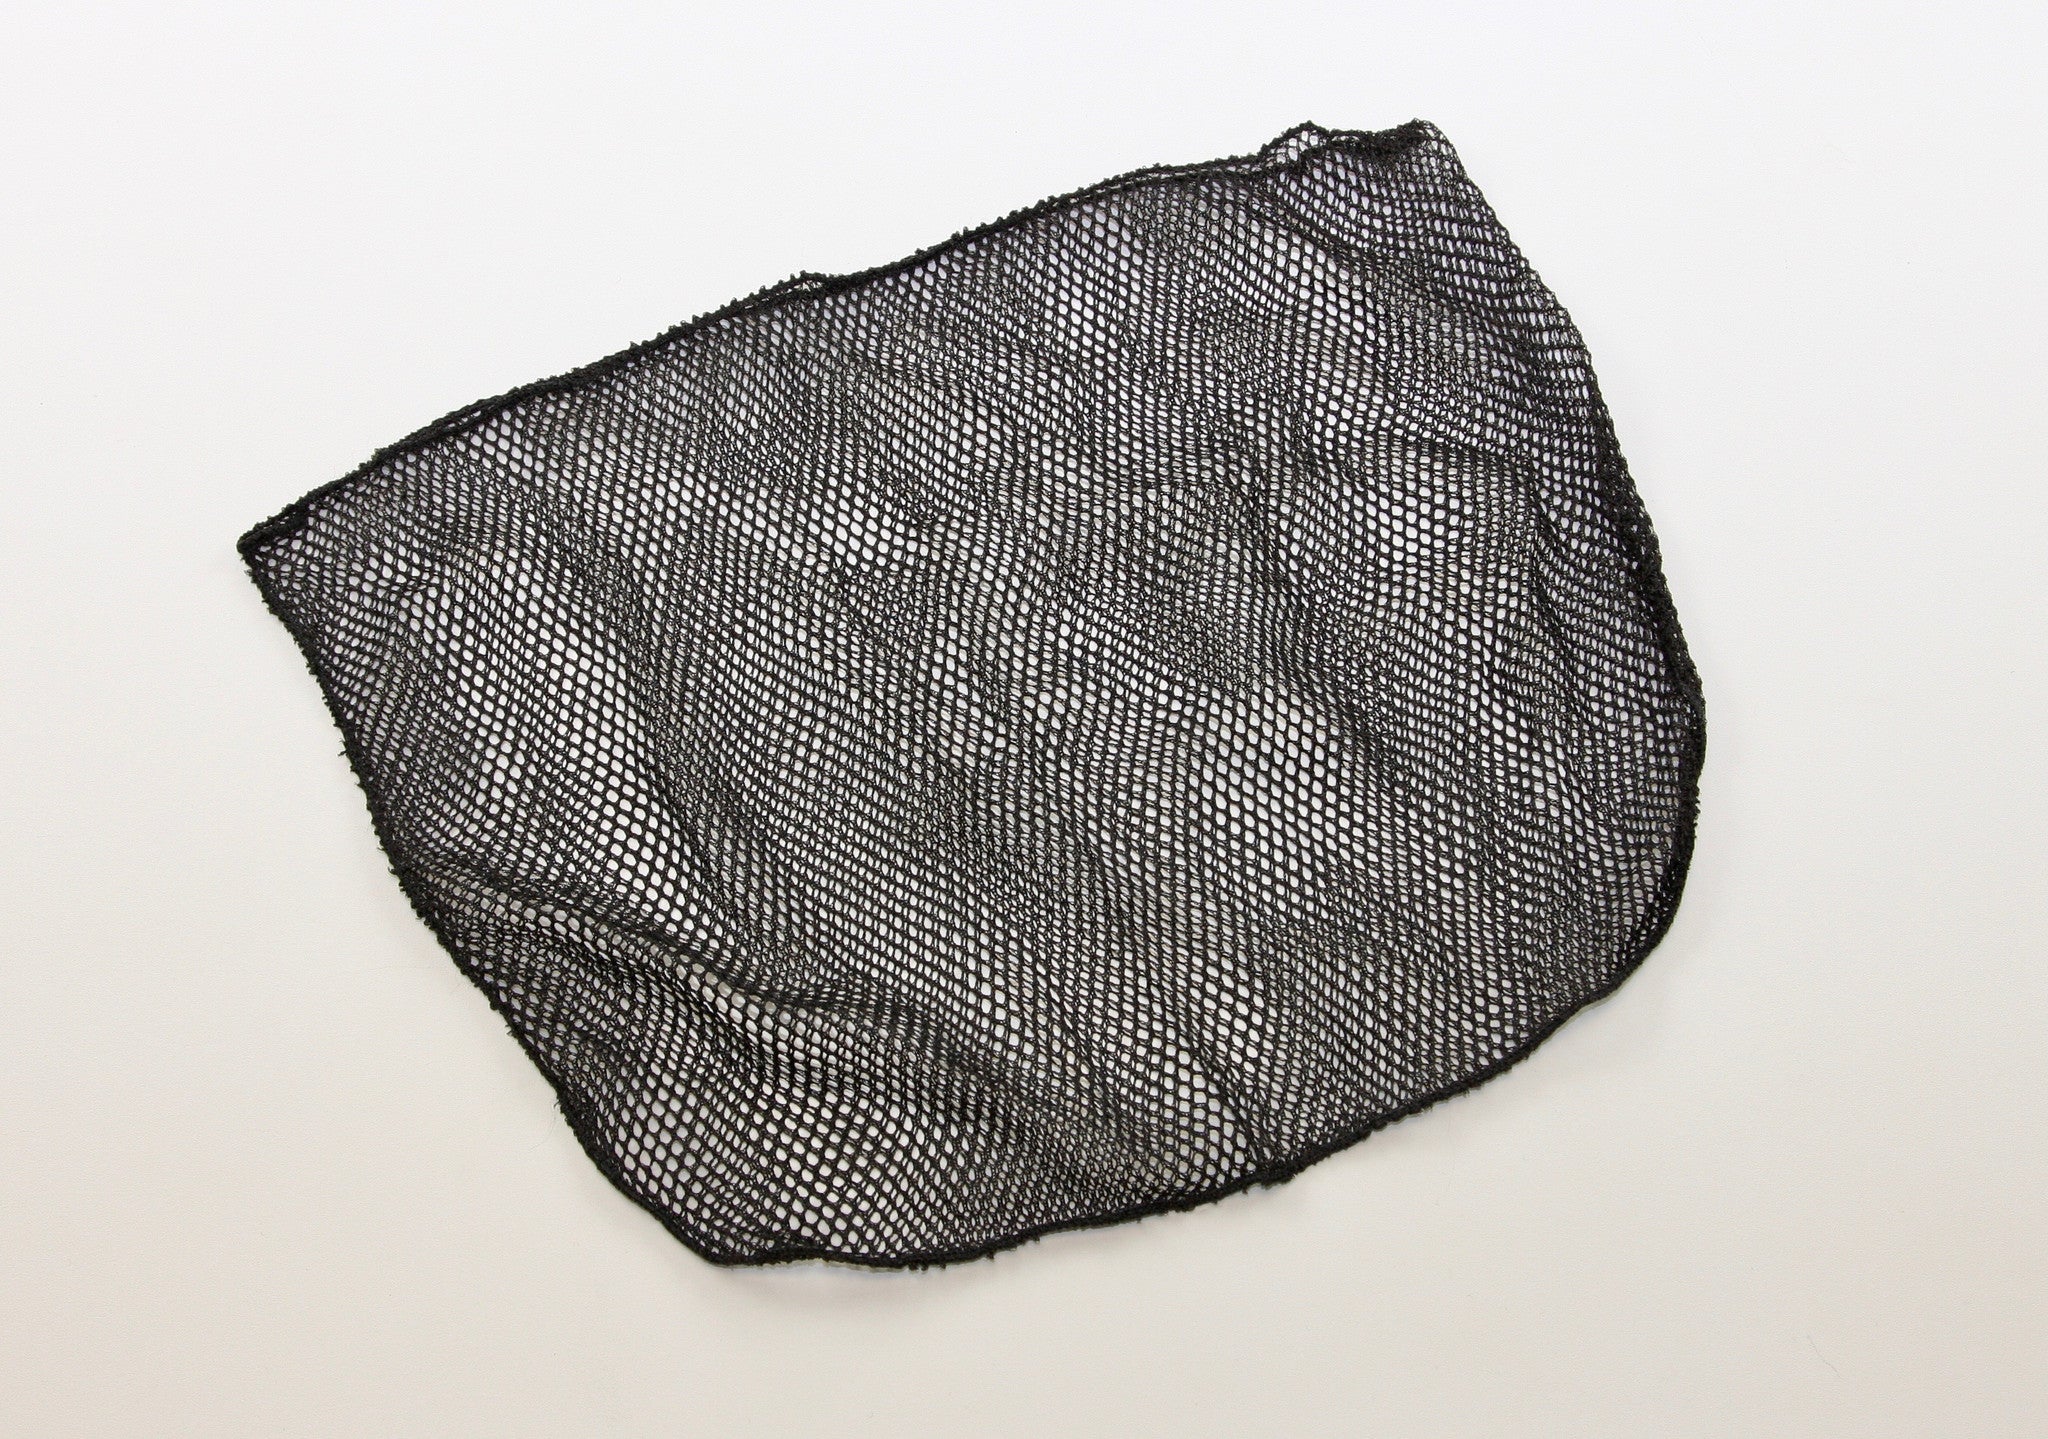 Soft nylon catch and release, landing net bags. Made in the USA. - Nets  that Honor the Fish